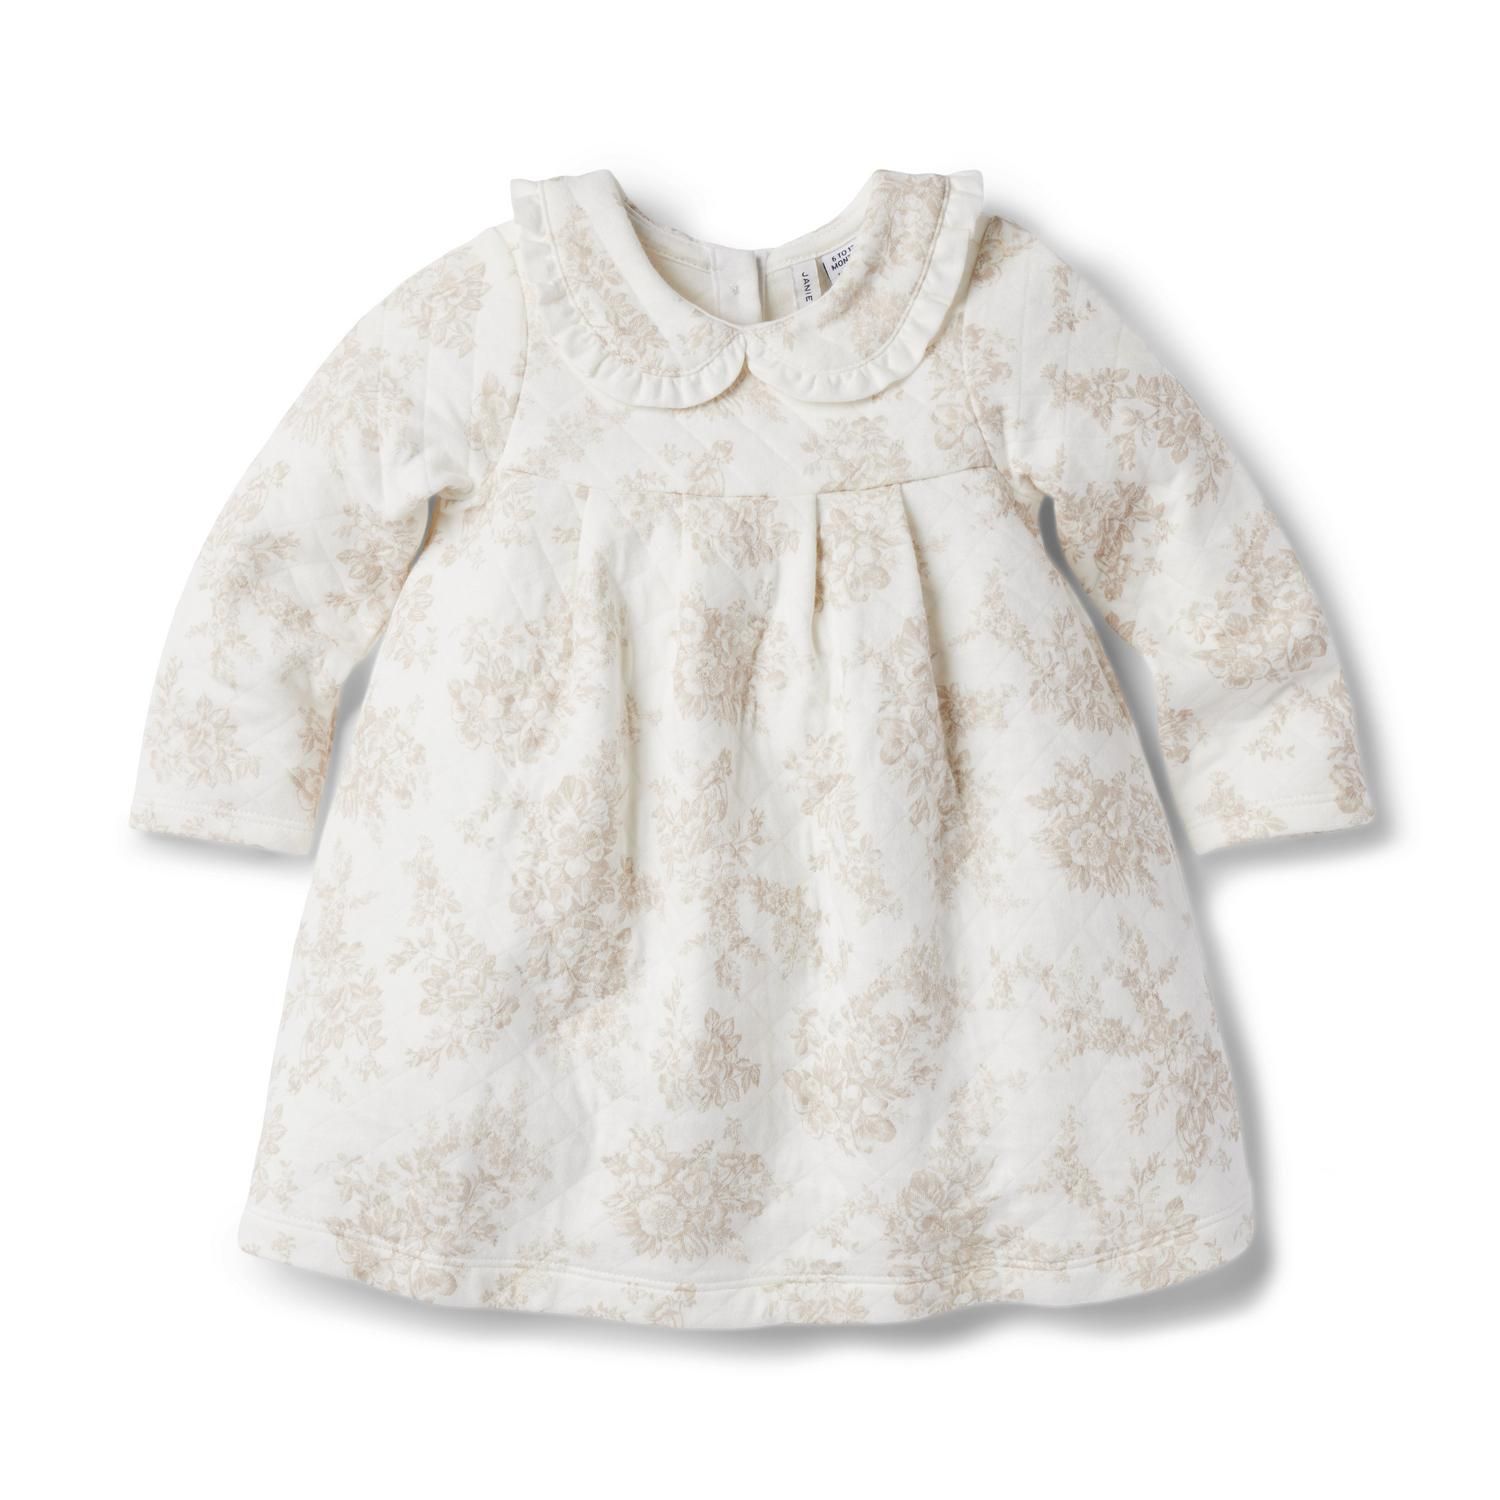 Baby Floral Quilted Dress | Janie and Jack